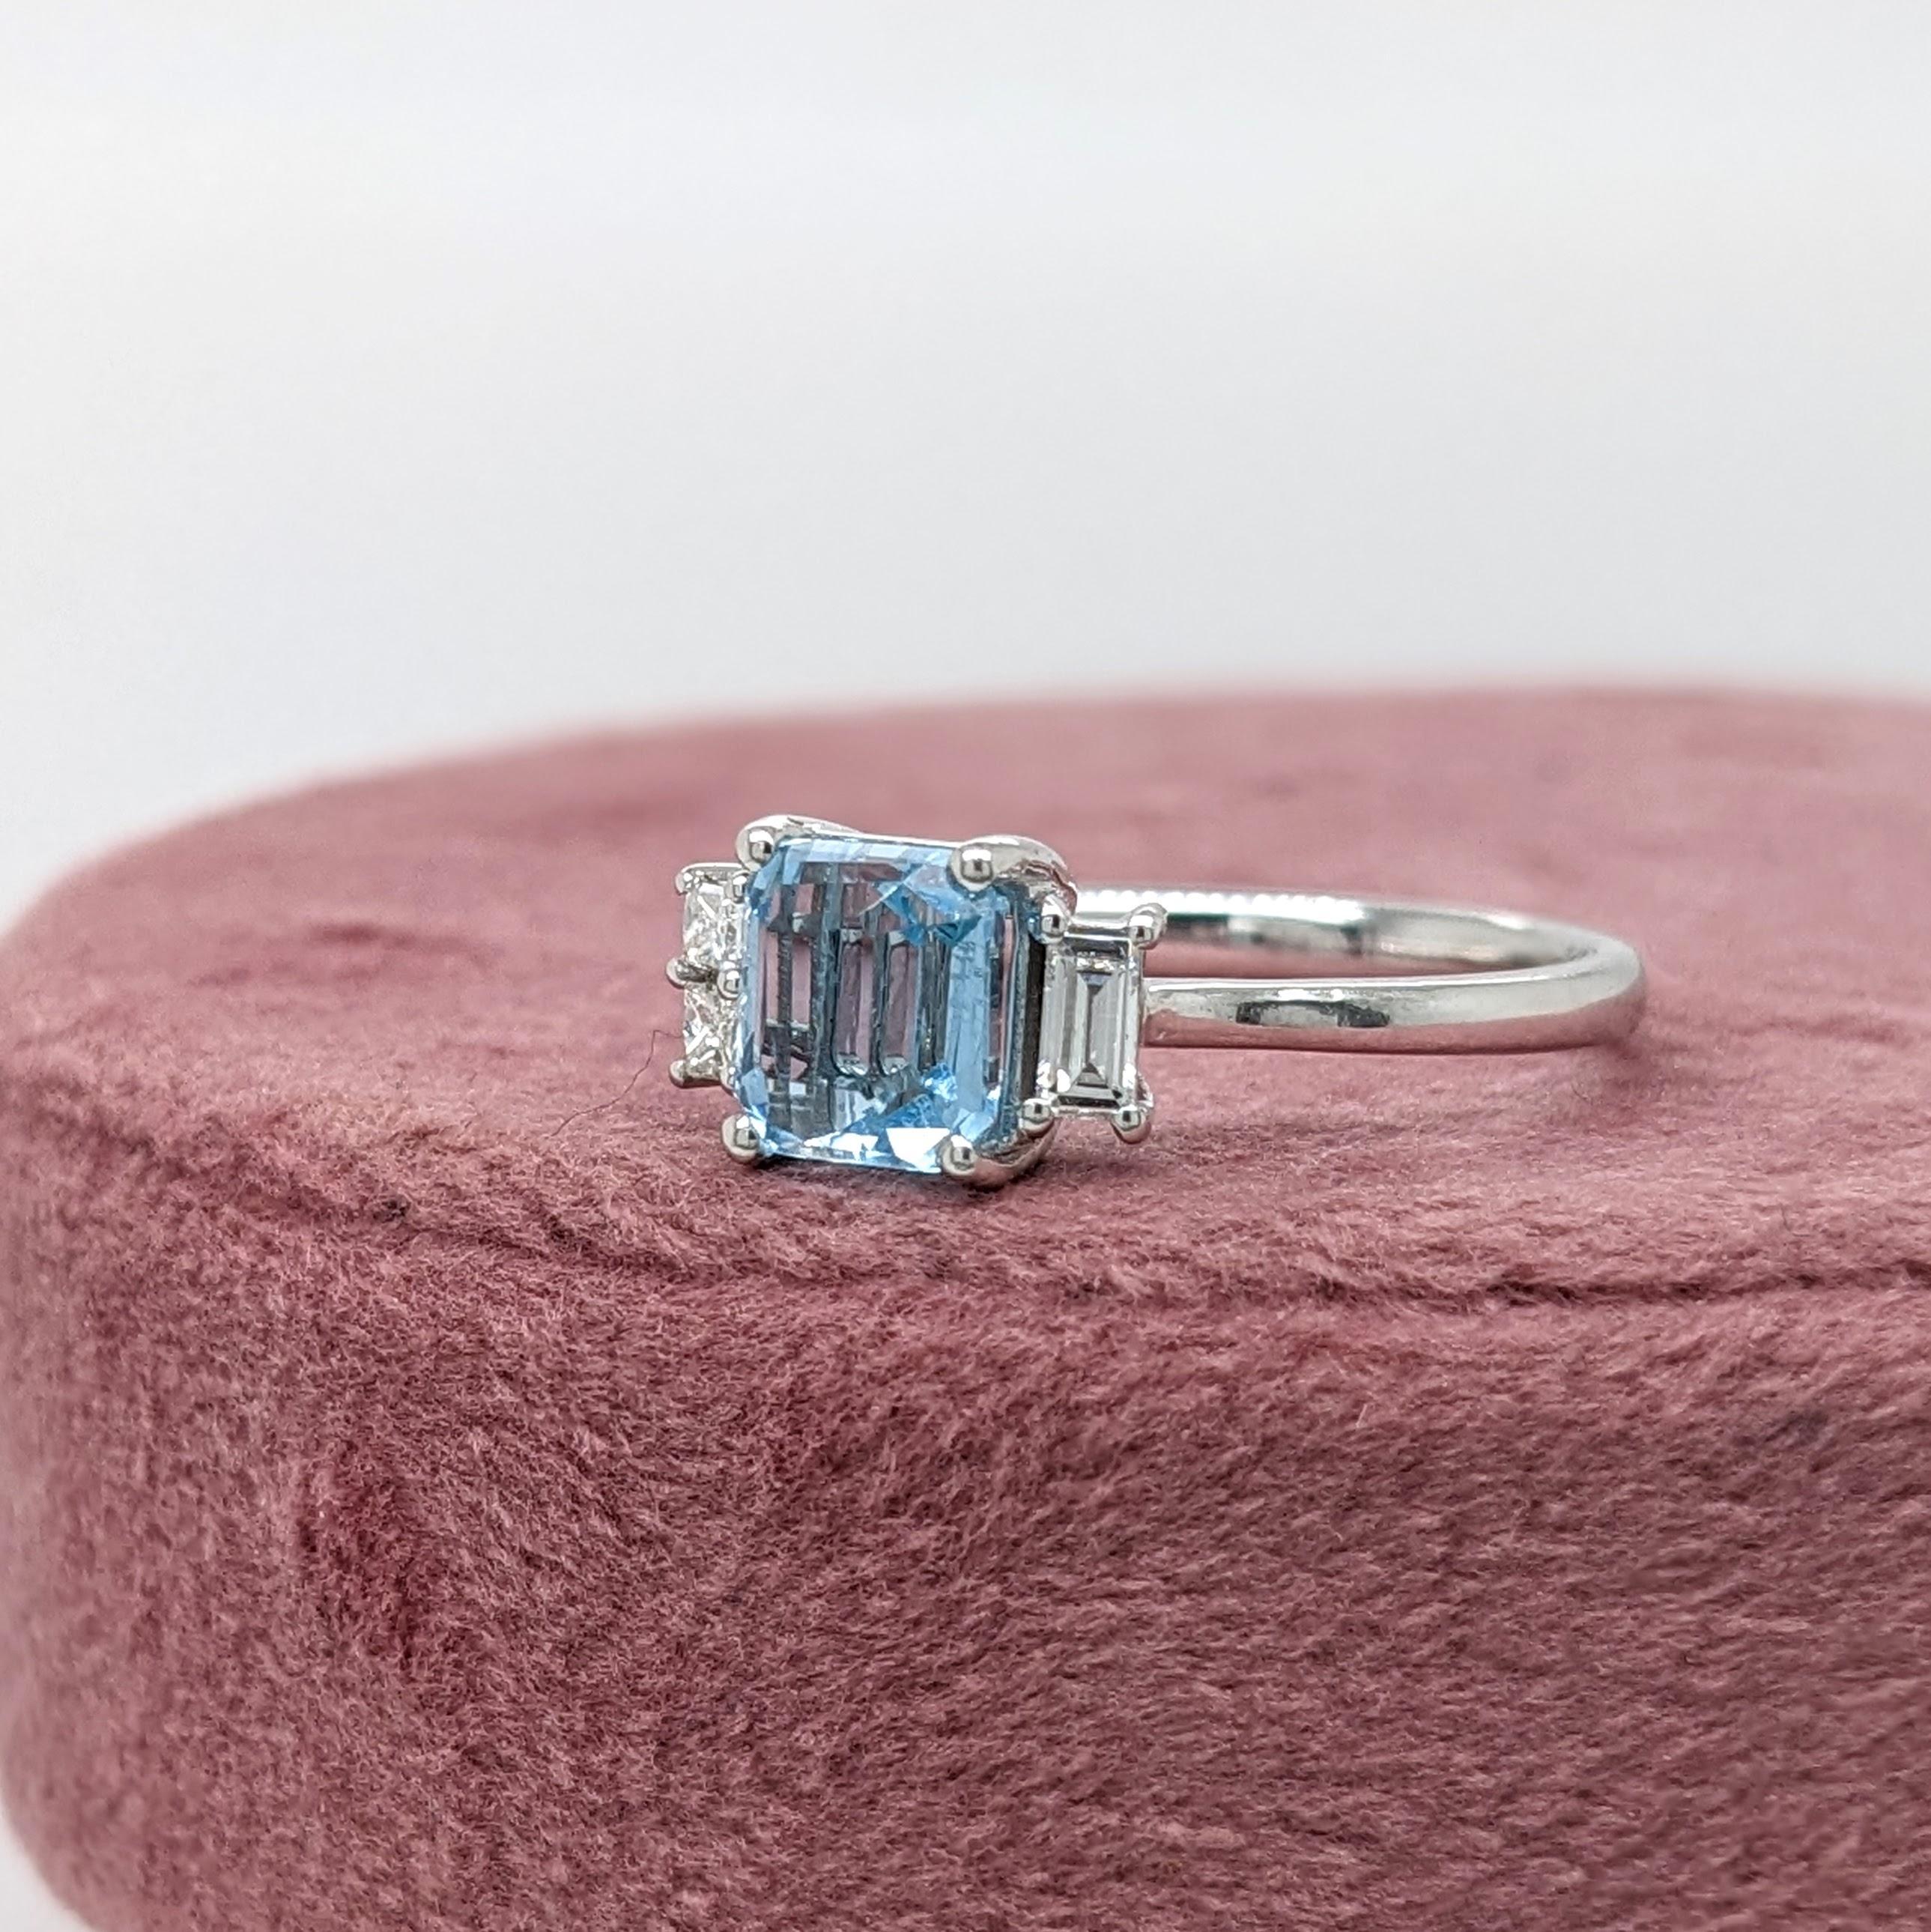 Modern 1ct Aquamarine Ring w Earth Mined Diamond in Solid 14K White Gold EM 6.5x5.5mm For Sale